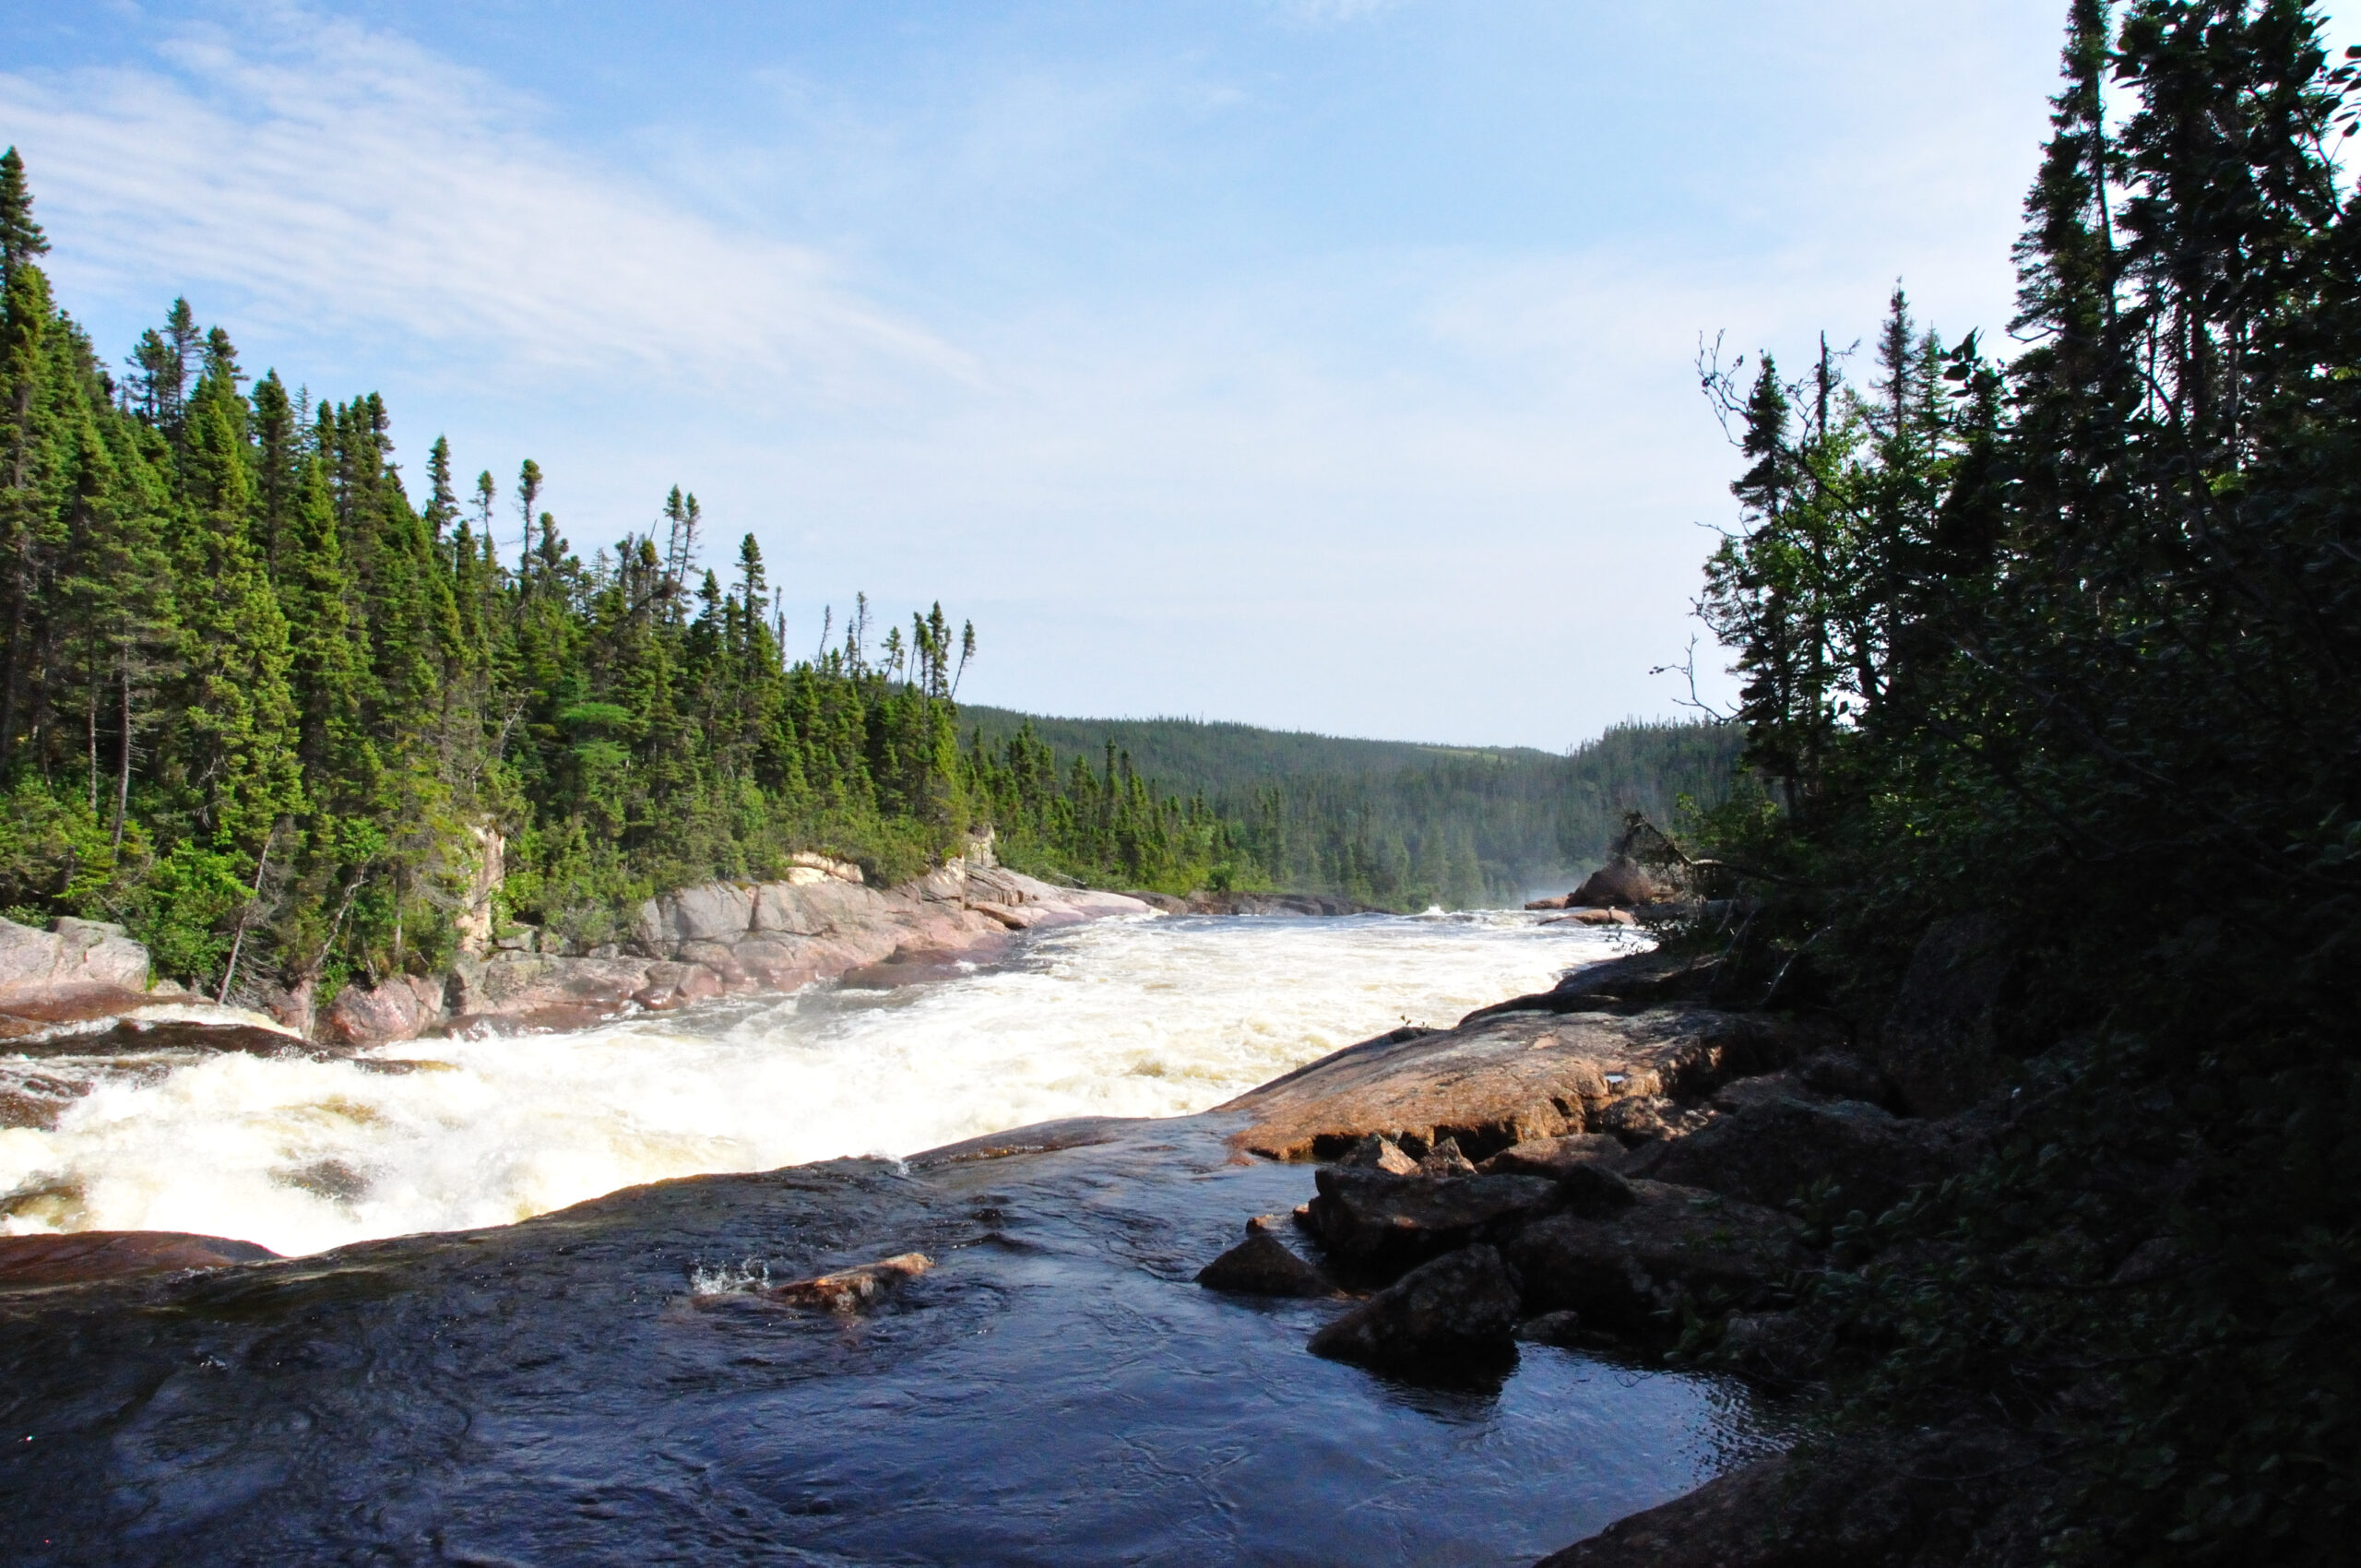 The Romaine river flowing through a forest, near Havre-St-Pierre, Quebec.